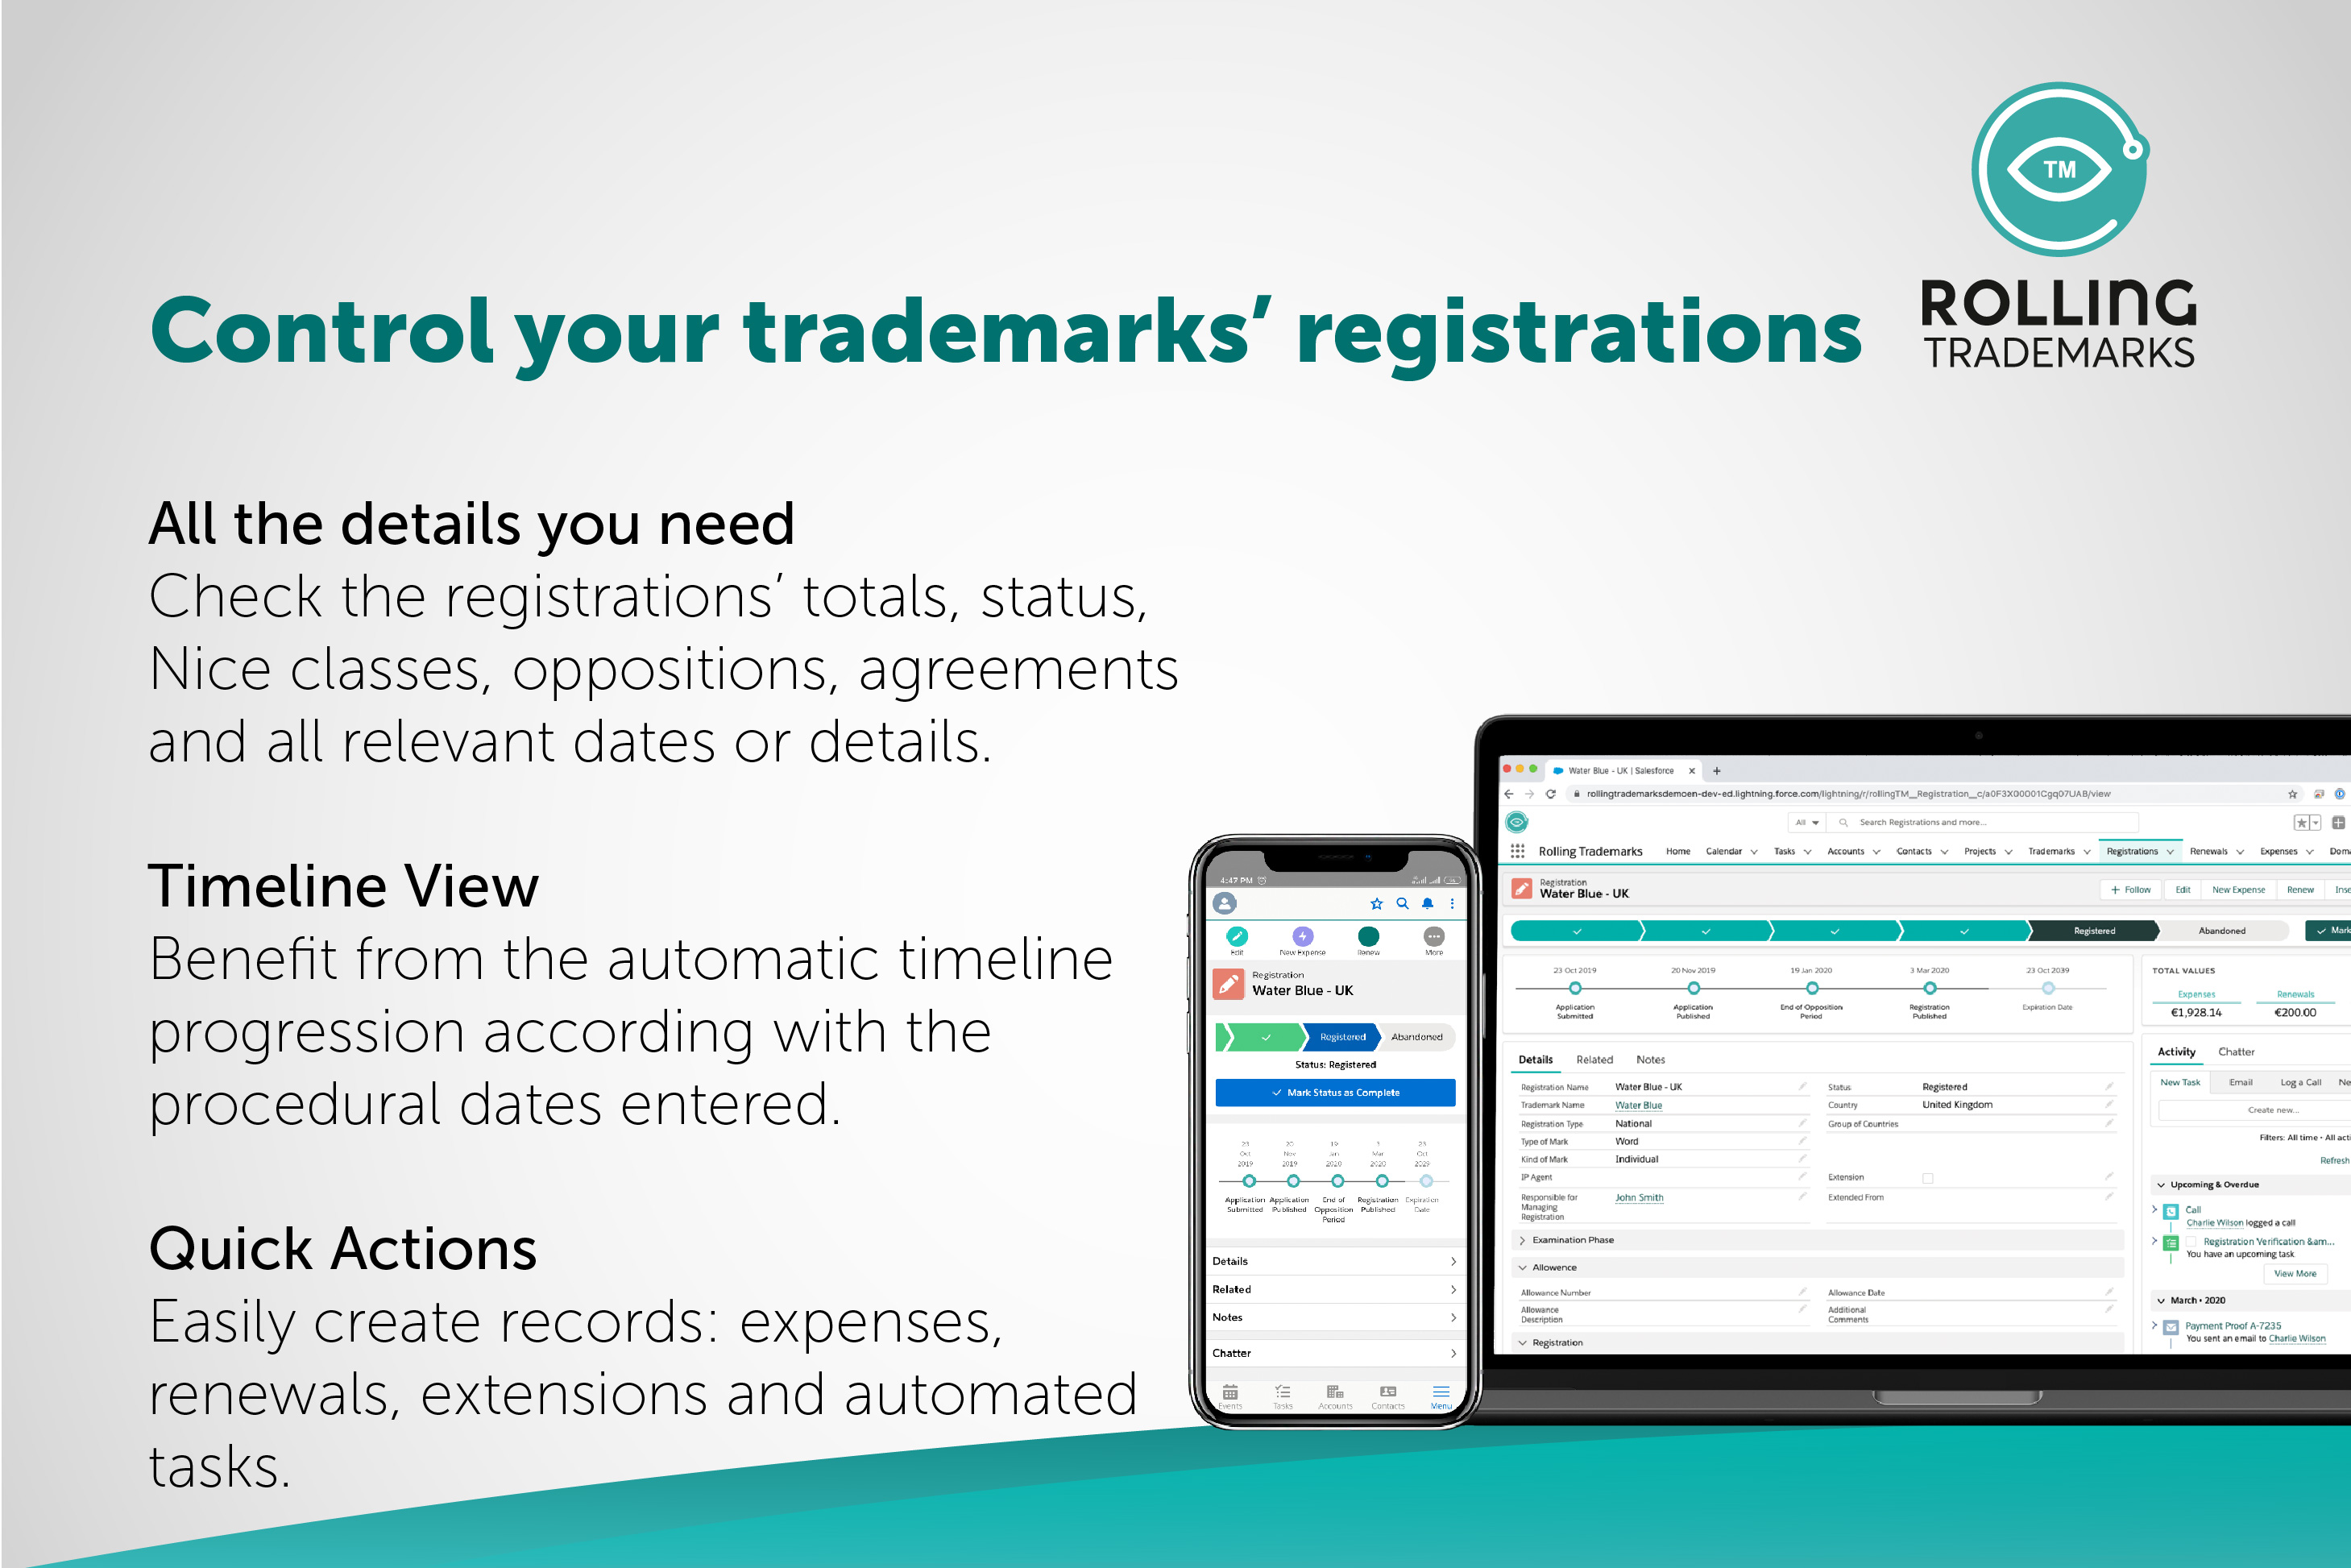 Rolling Trademarks: Control all the details you need